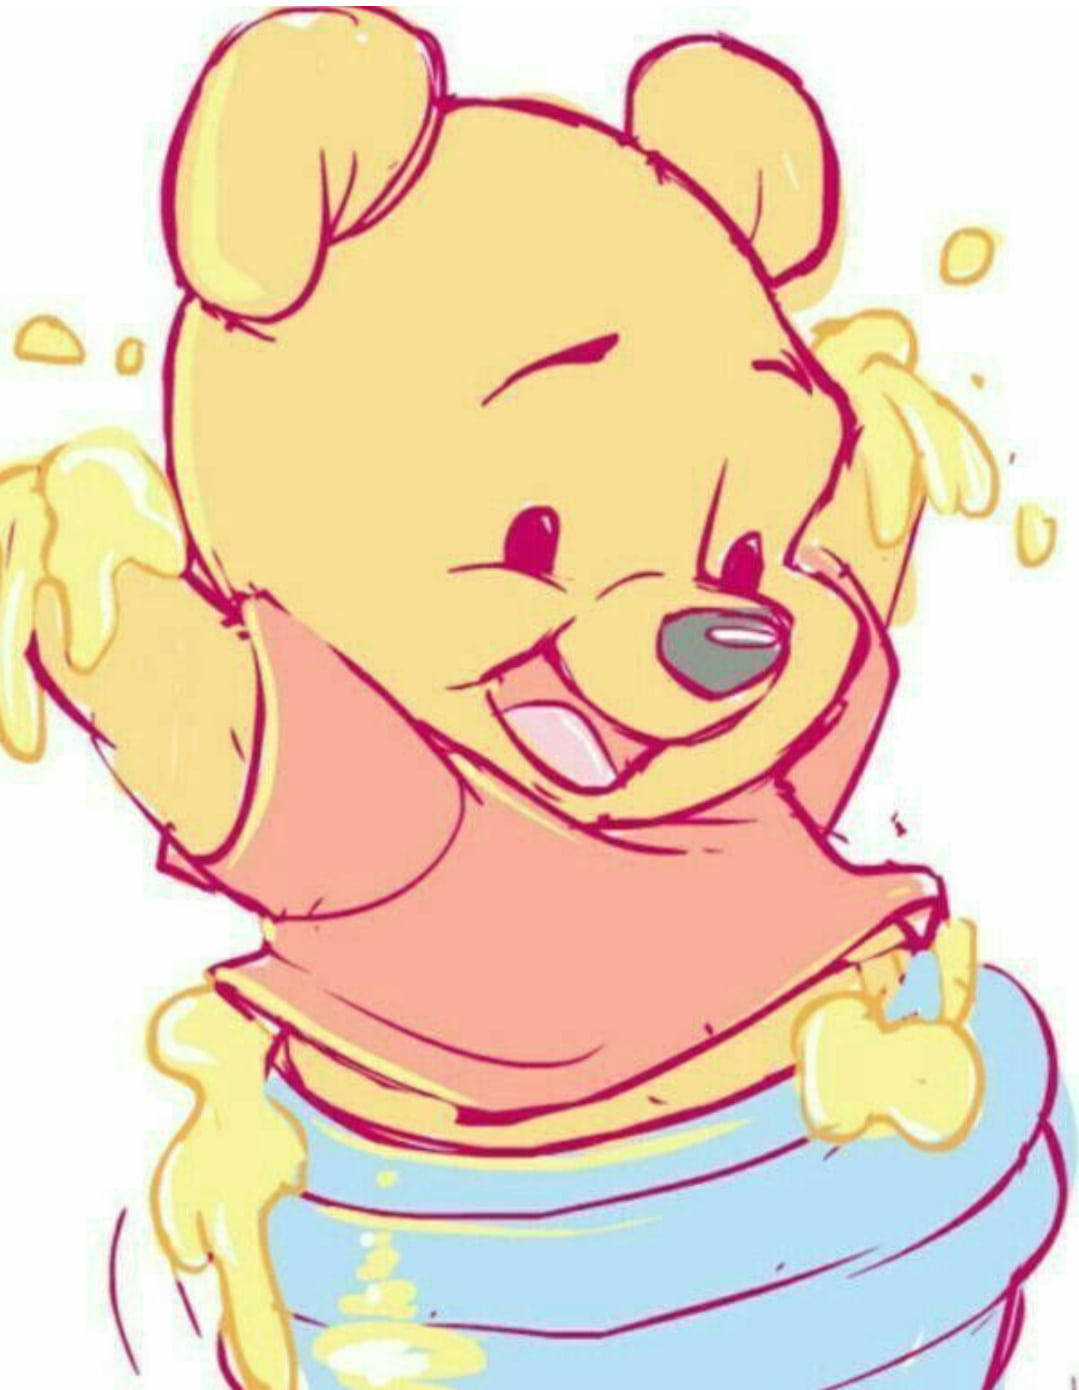 Cute Wallpaper  Winnie the pooh pictures Cartoon wallpaper iphone Cute  winnie the pooh